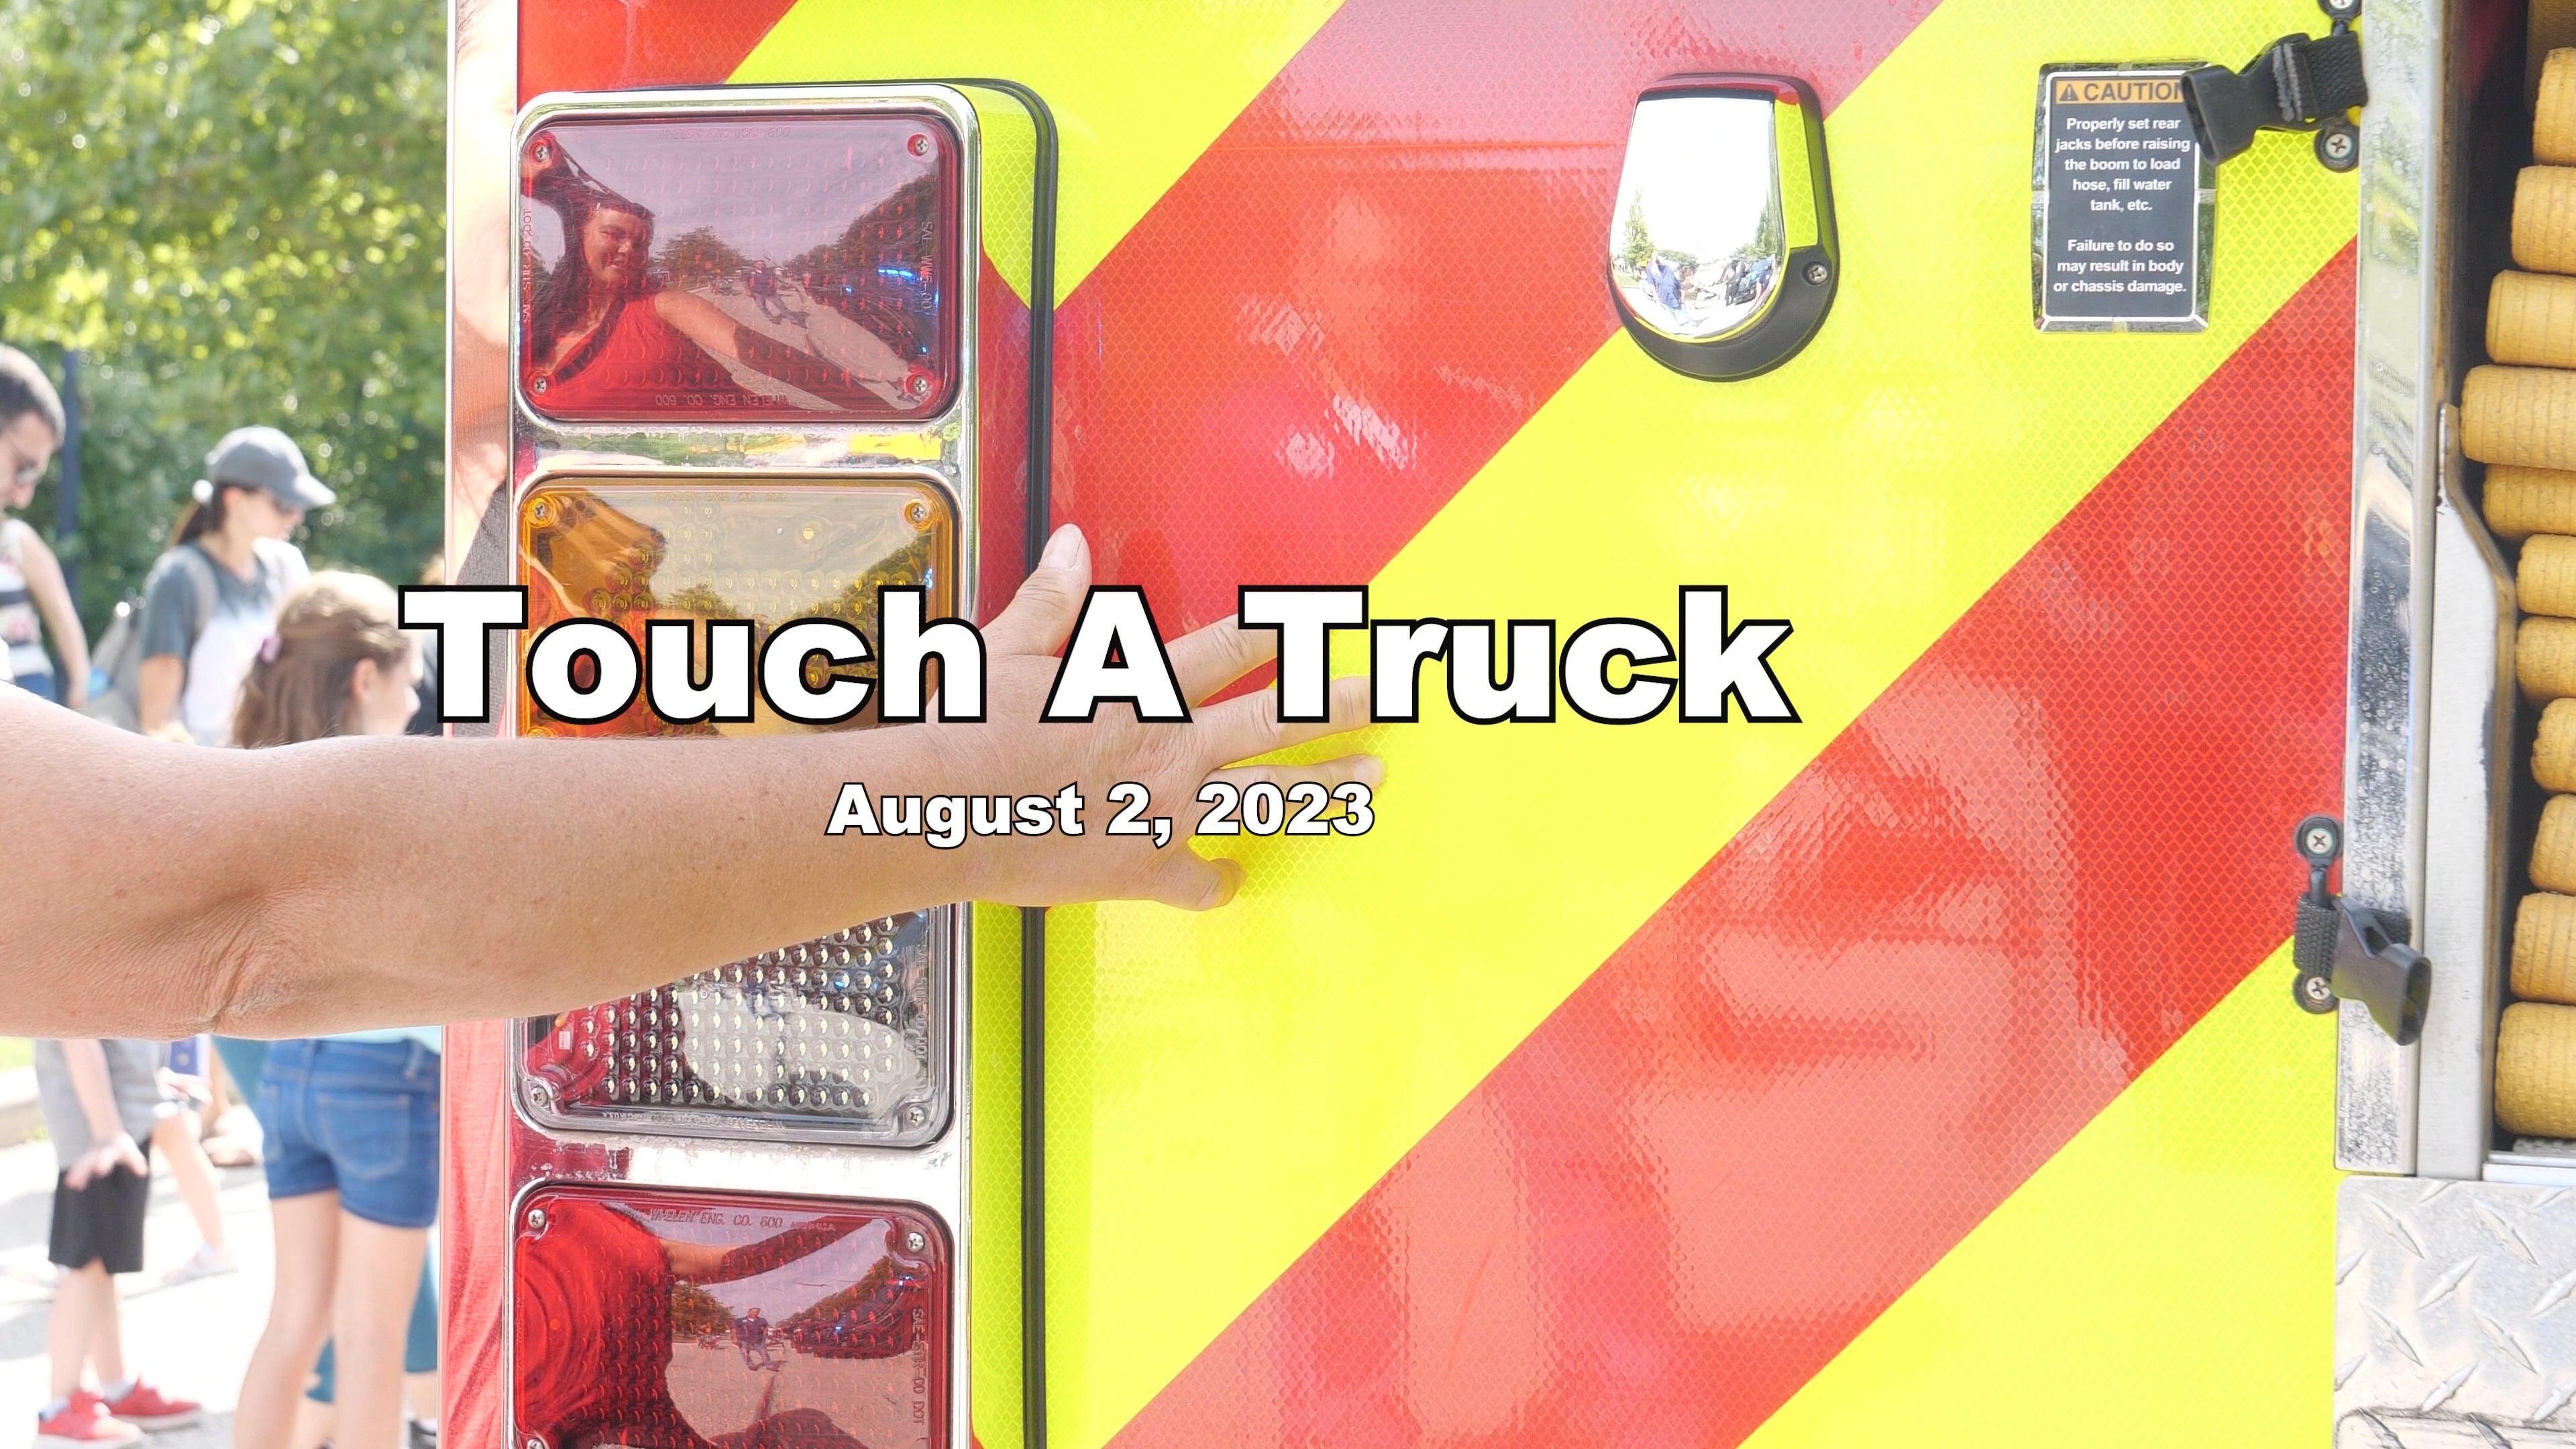 Touch a truck promo 2023